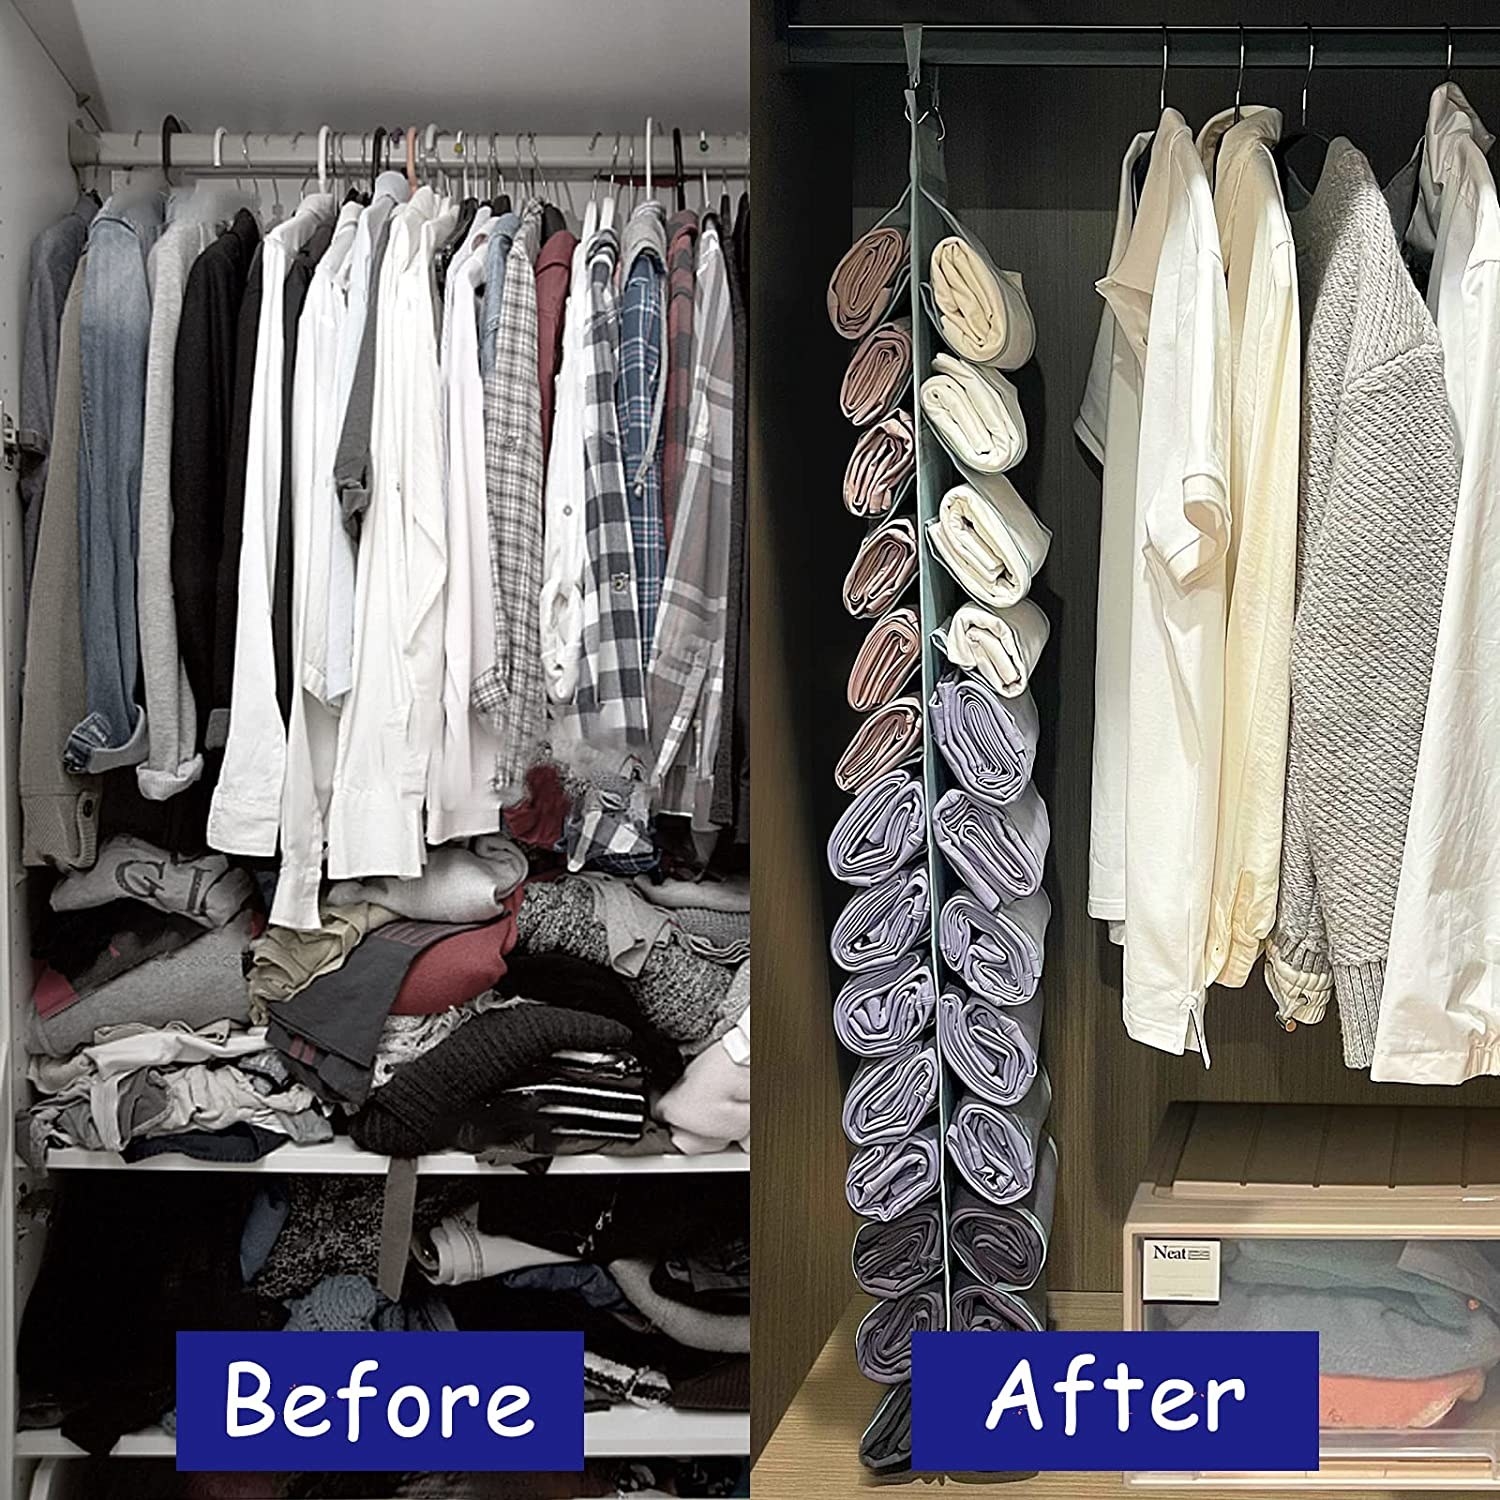 before and after photos of a messy closet looking more organized after using the bag